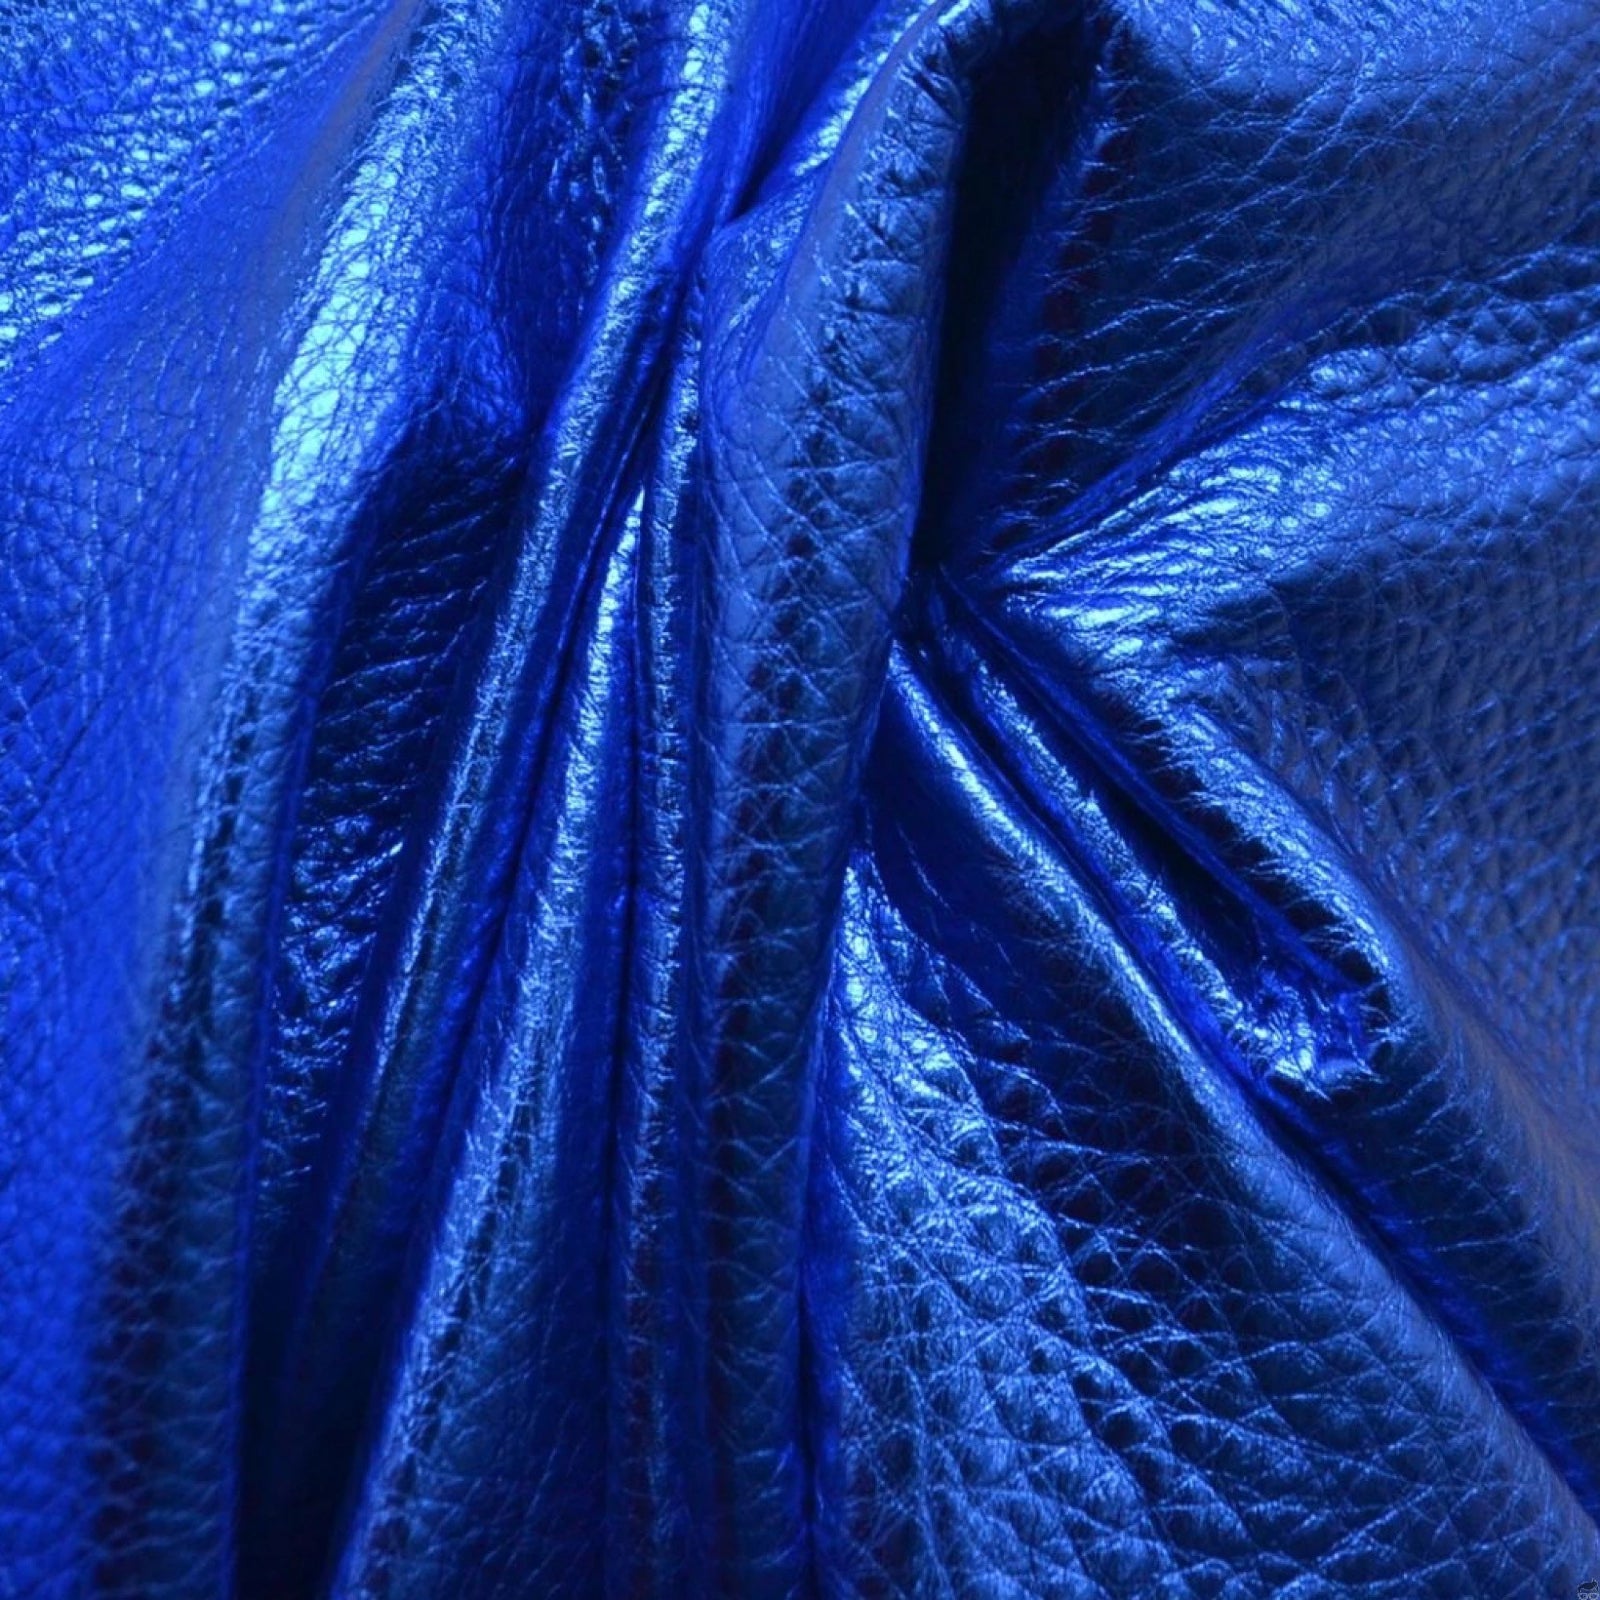 BLUE Metallic Leather Hide // Choose Your Size//genuine Metal Blue Leather  Skin //shiny Pieces for Crafting //ROYAL BLUE, 352, 0.9mm/2.25oz 